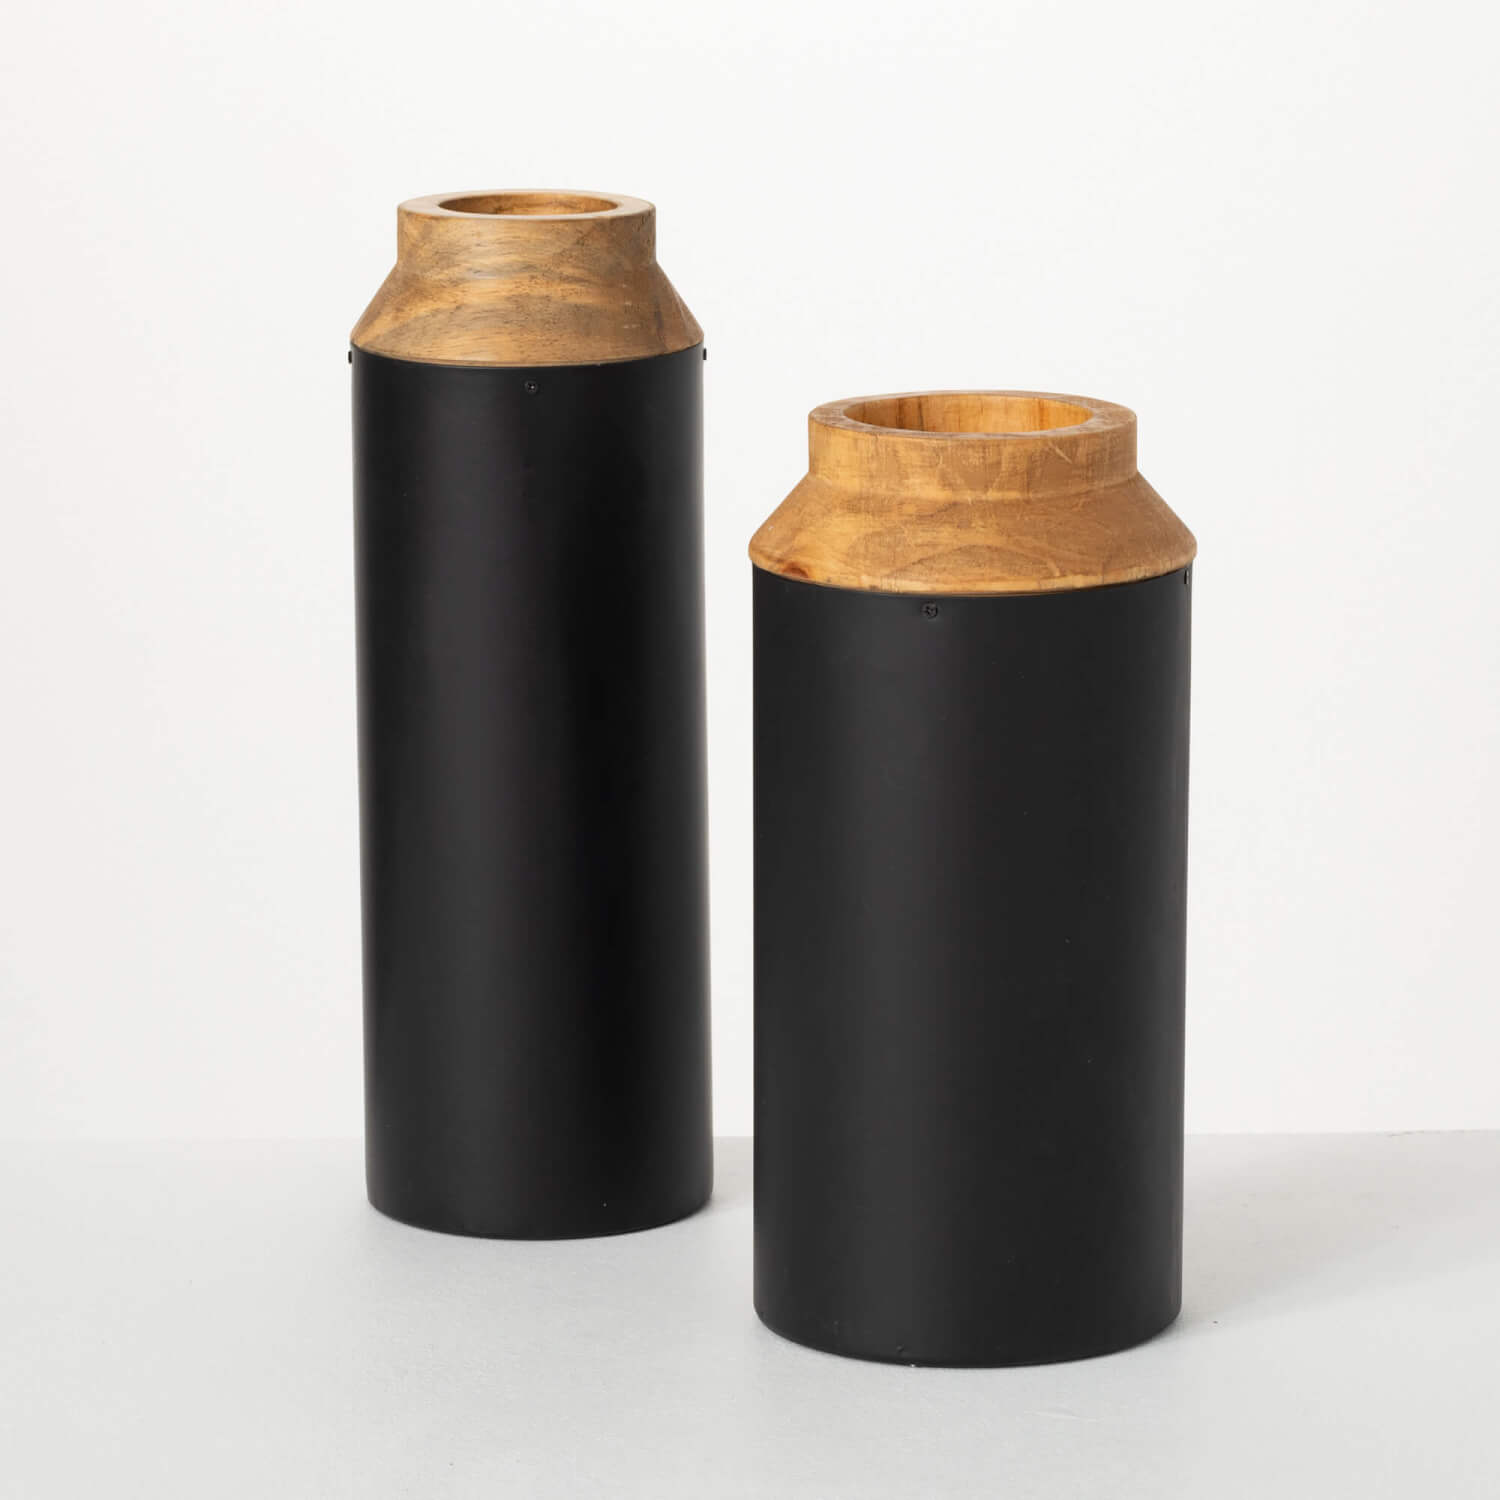 both sizes of black metal and wood vases against a light gray background